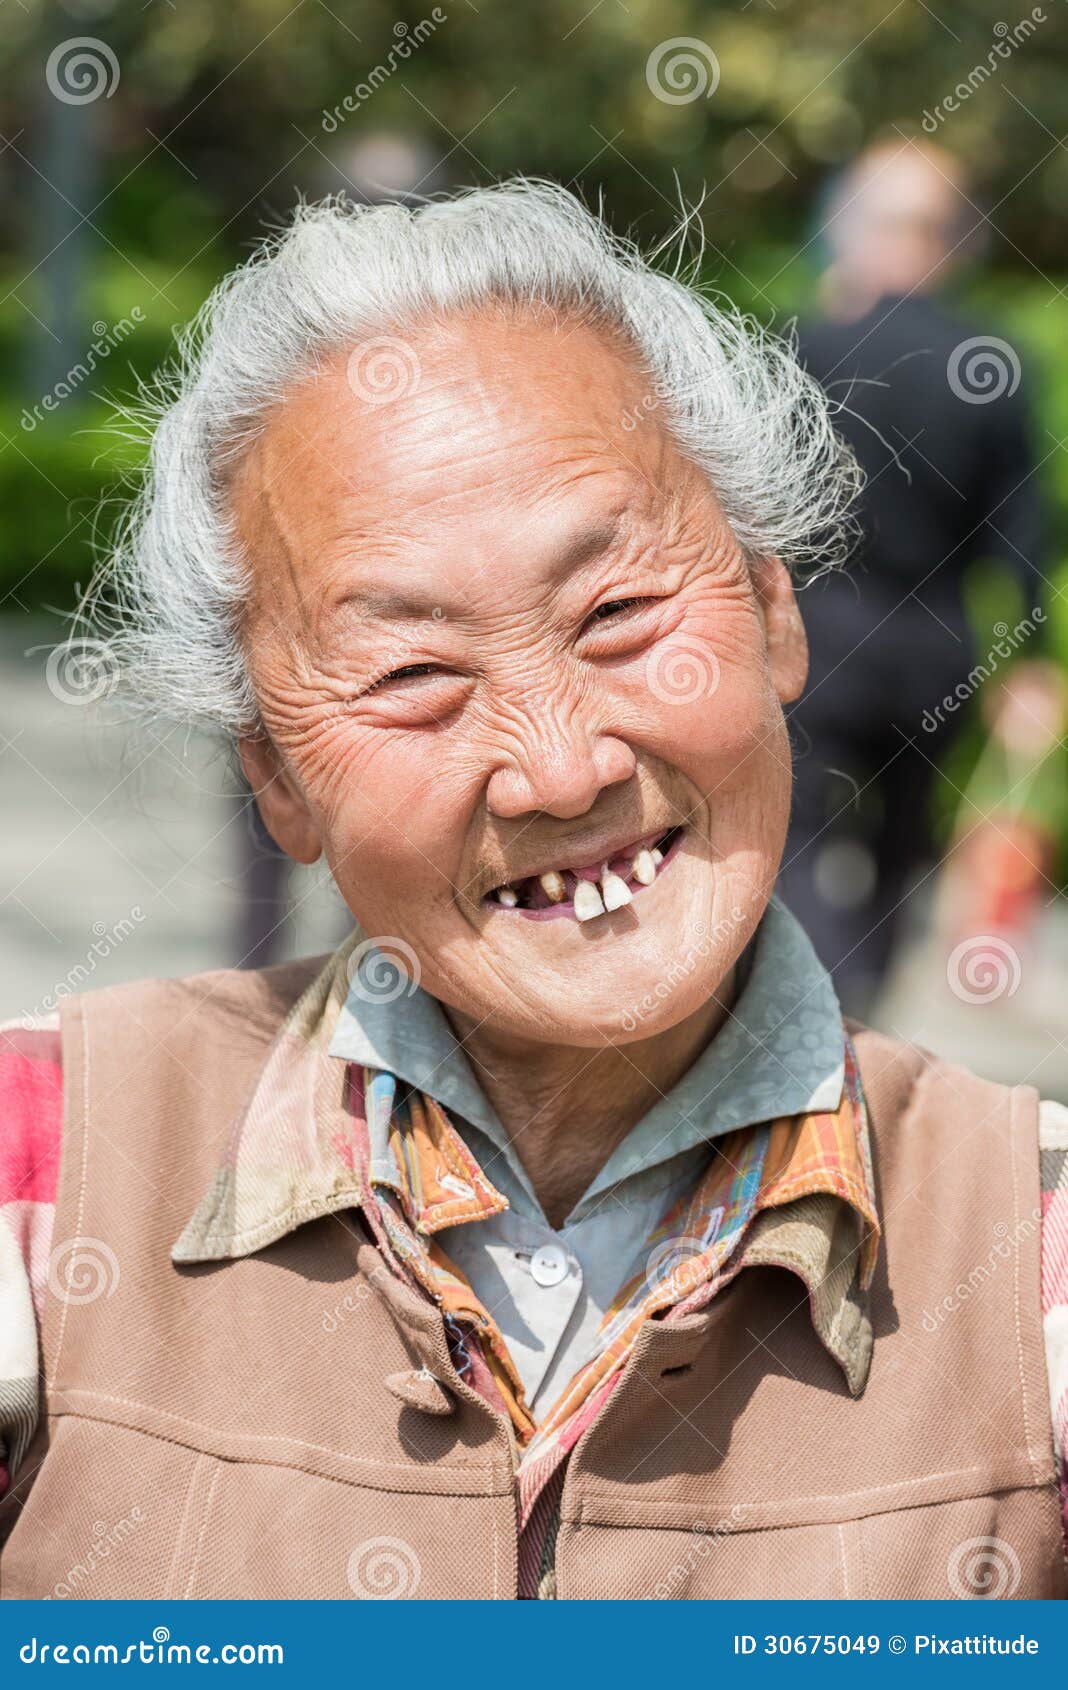 old lady with no teeth